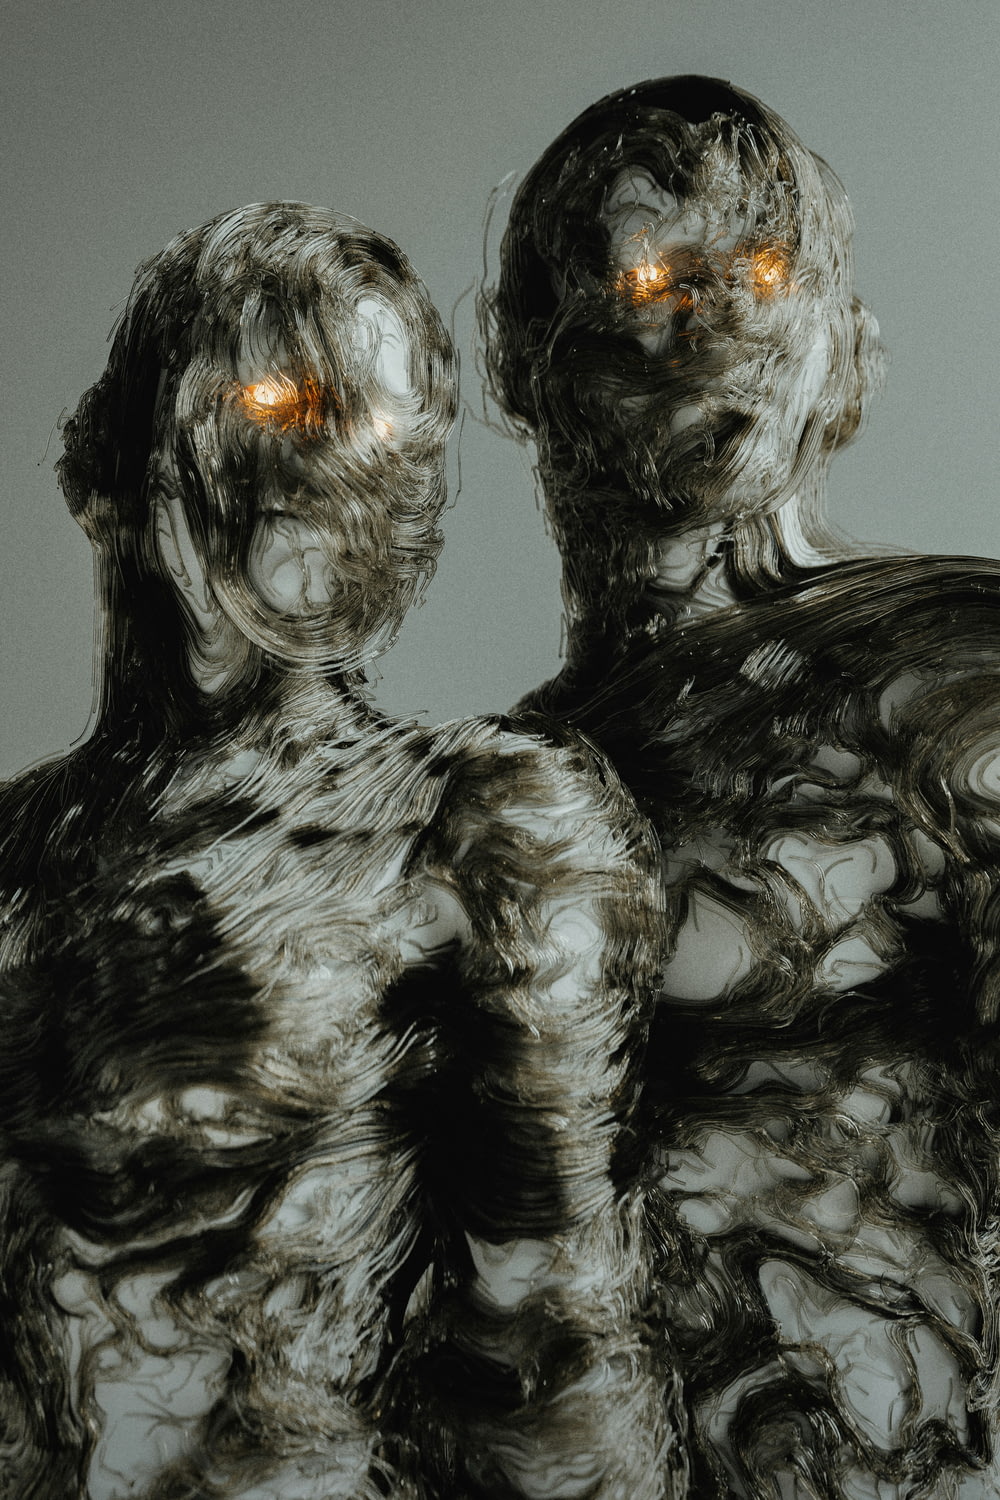 a couple of weird looking figures with glowing eyes